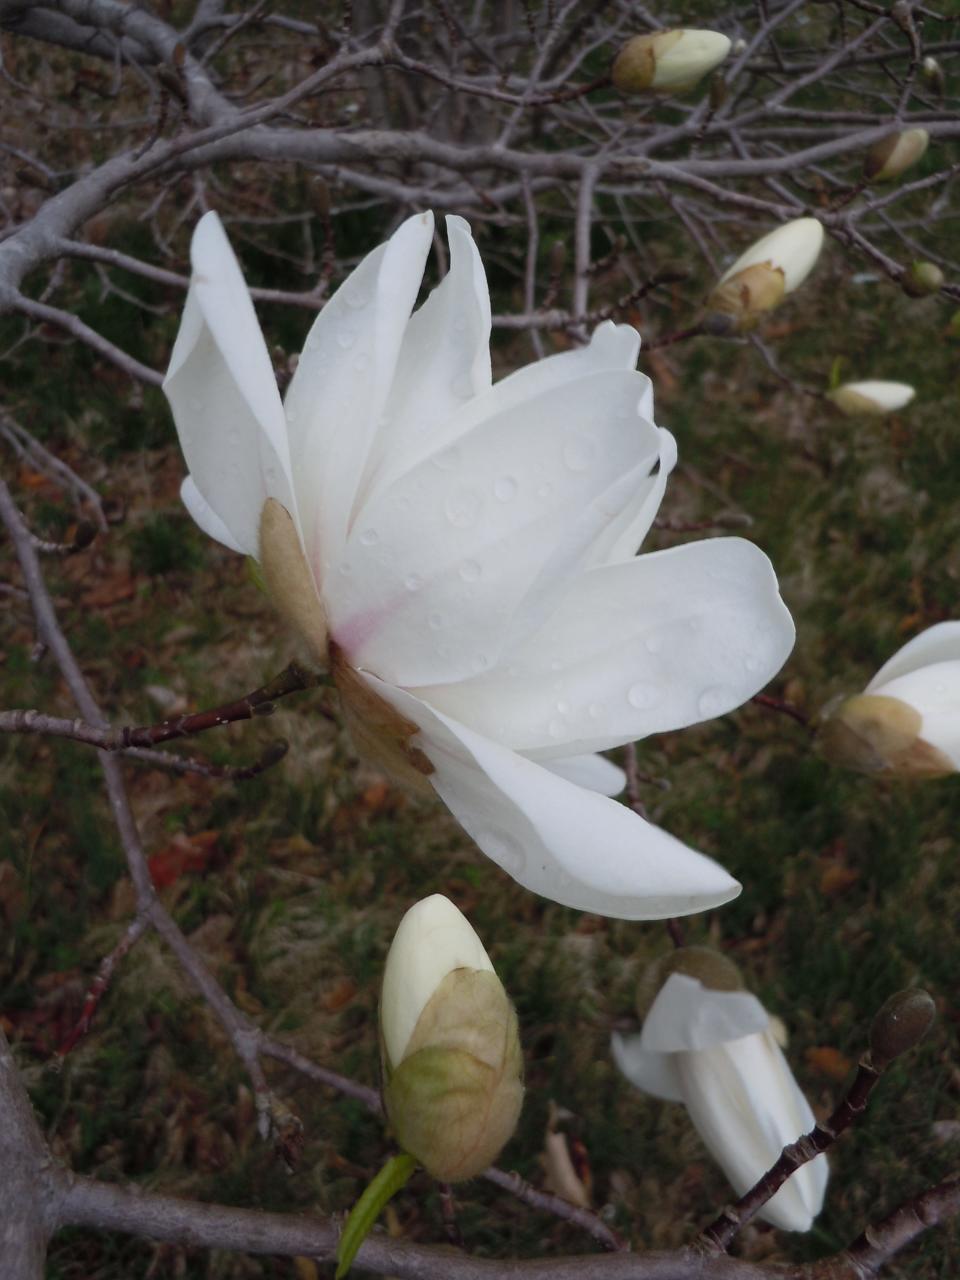 Star magnolia, a plant that evolved in a moderate, maritime climate, is often fooled by early warm spells in Kentucky’s continental climate but lacks tie freeze tolerance mechanisms in its floral parts.